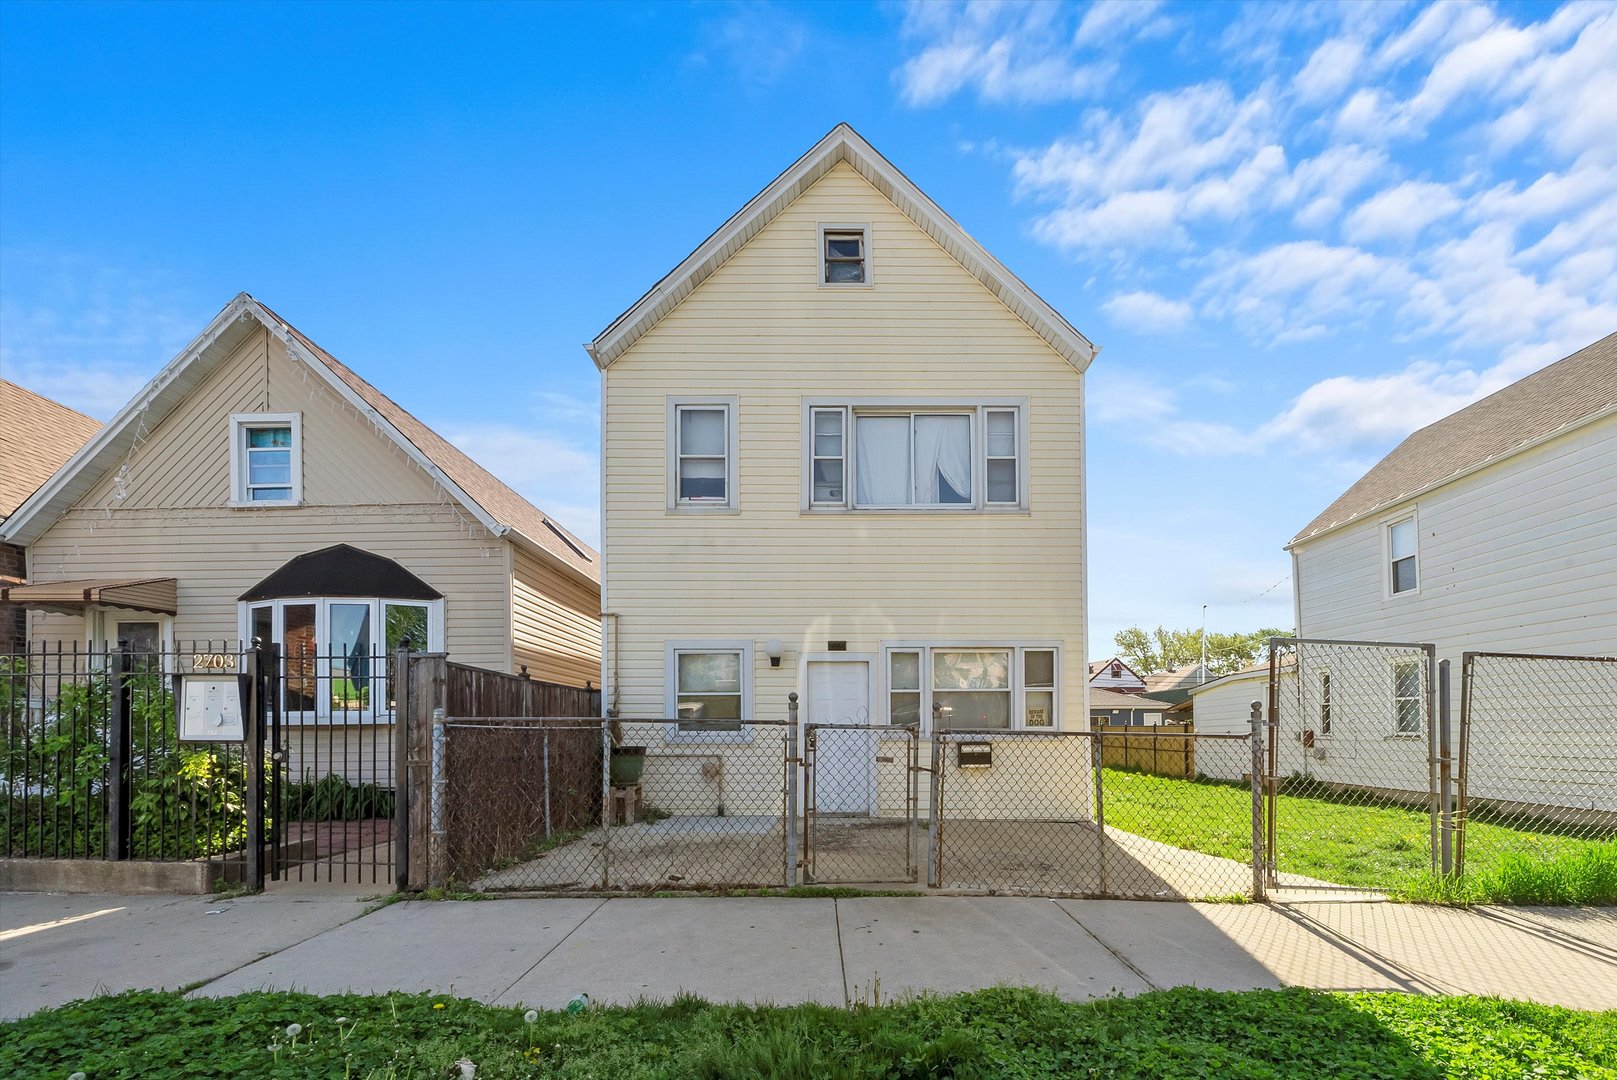 4 House in South Lawndale